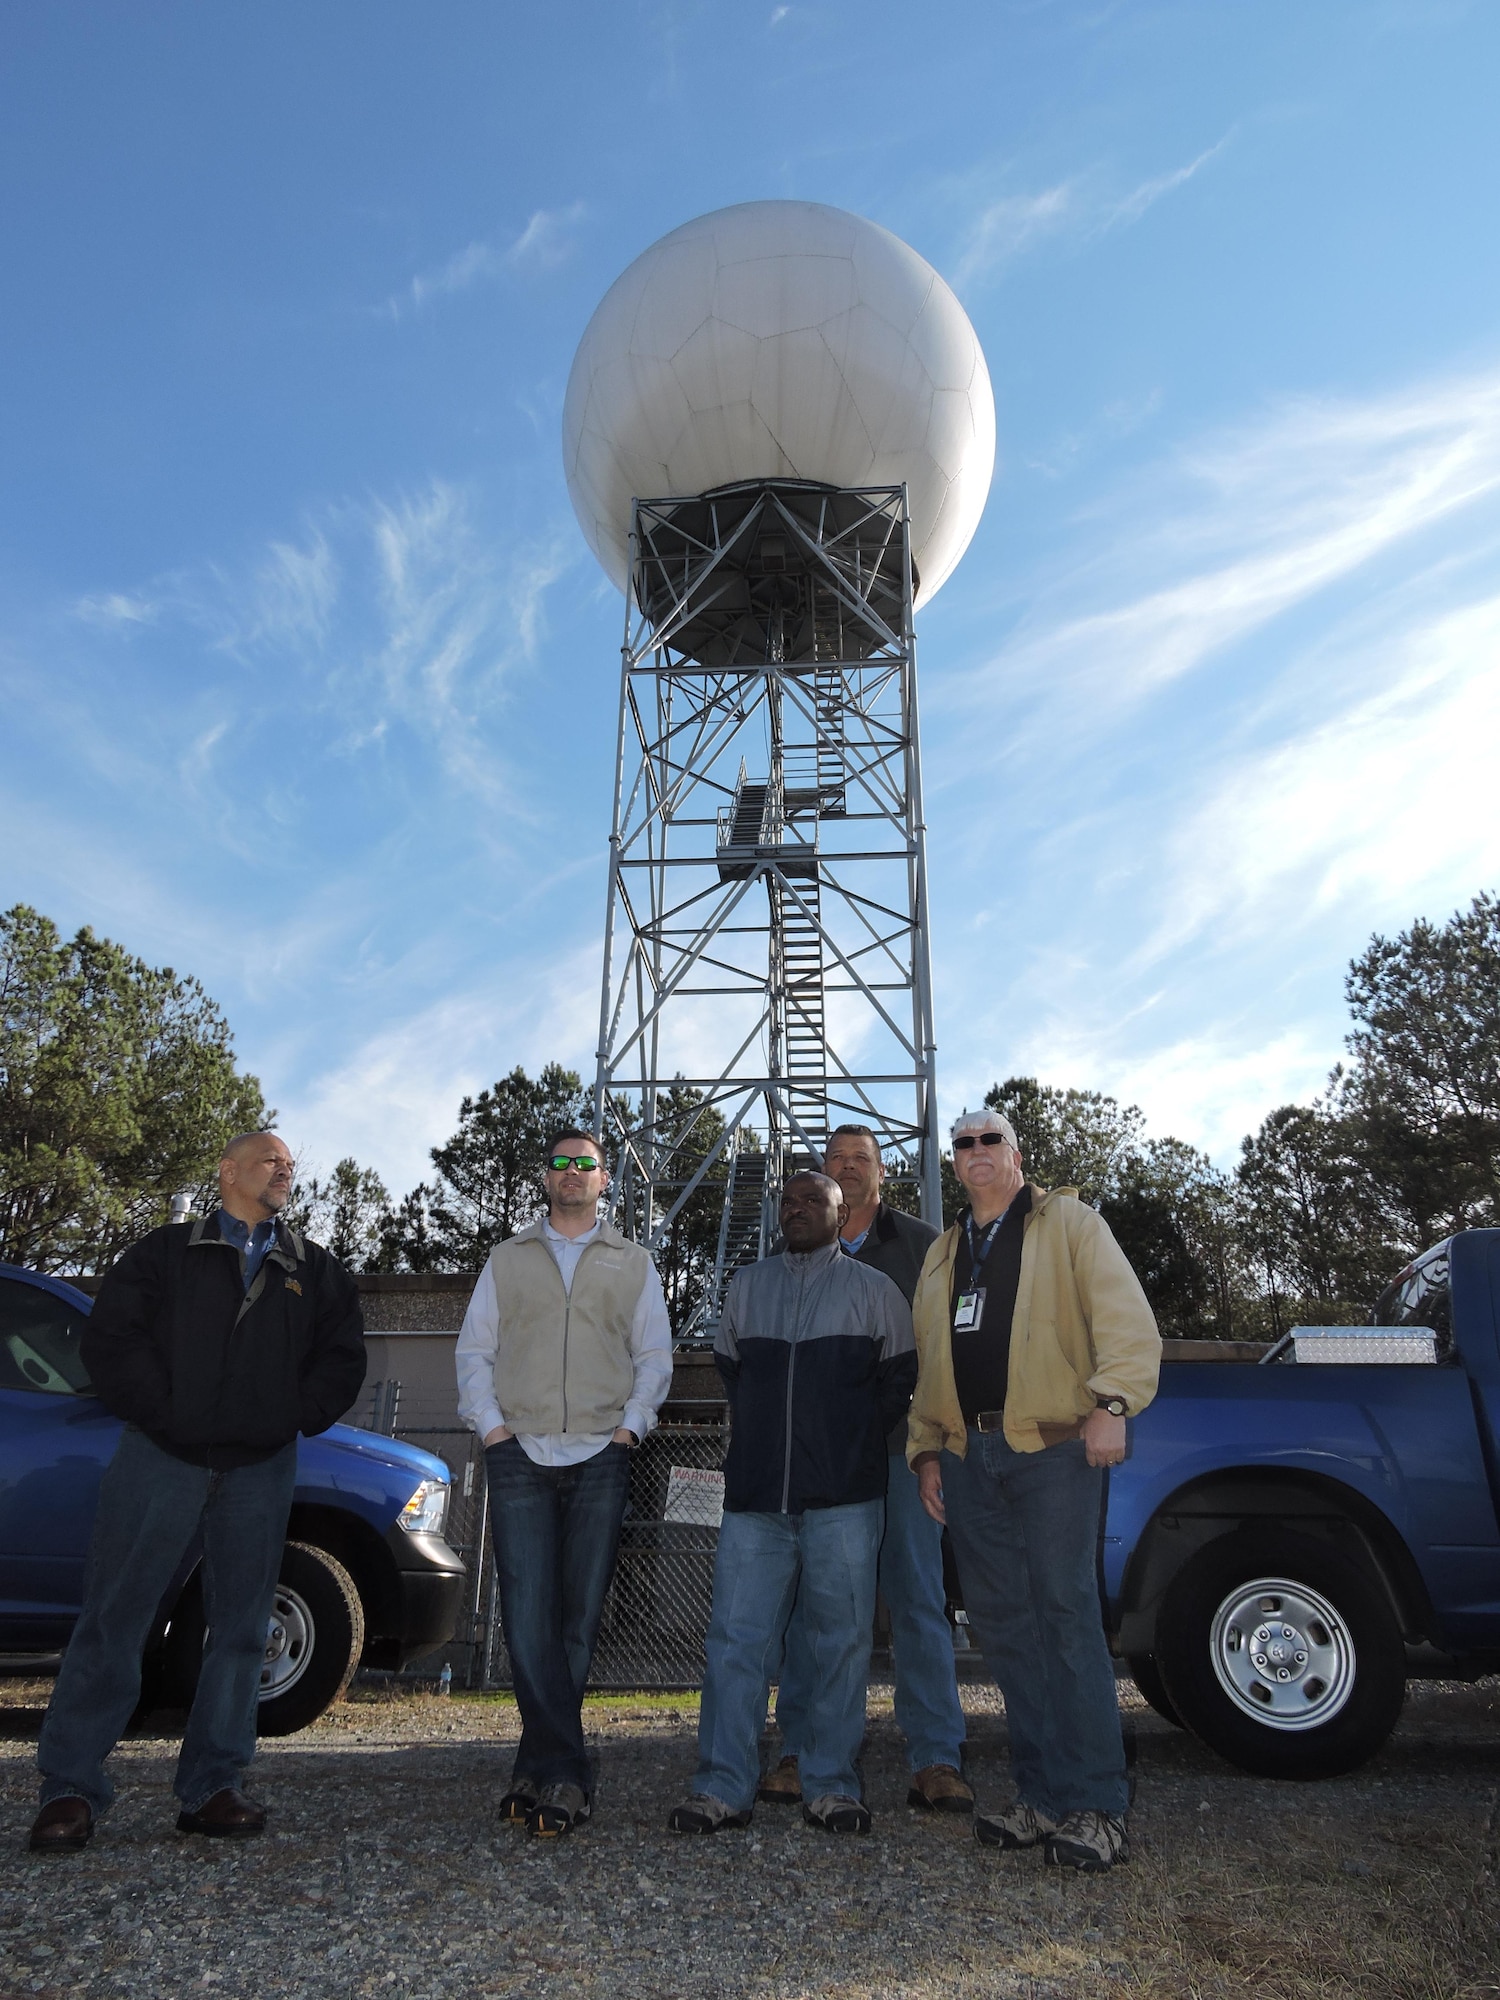 The 78th Operations Support Squadron, Air Traffic Control and Landing Systems (ATCALS) maintenance team (L-R, George Pacheco, Brian Lambert, Michael Jordan, Sam Pursley and Dennis Robbins) made emergency repairs to the Doppler radar during the Jan. 21 – 22 severe storms that came through Middle Georgia. Their work enabled the radar to track and provide early warnings to alert residents to take cover. 
(U.S. Air Force photo by Roland Leach)